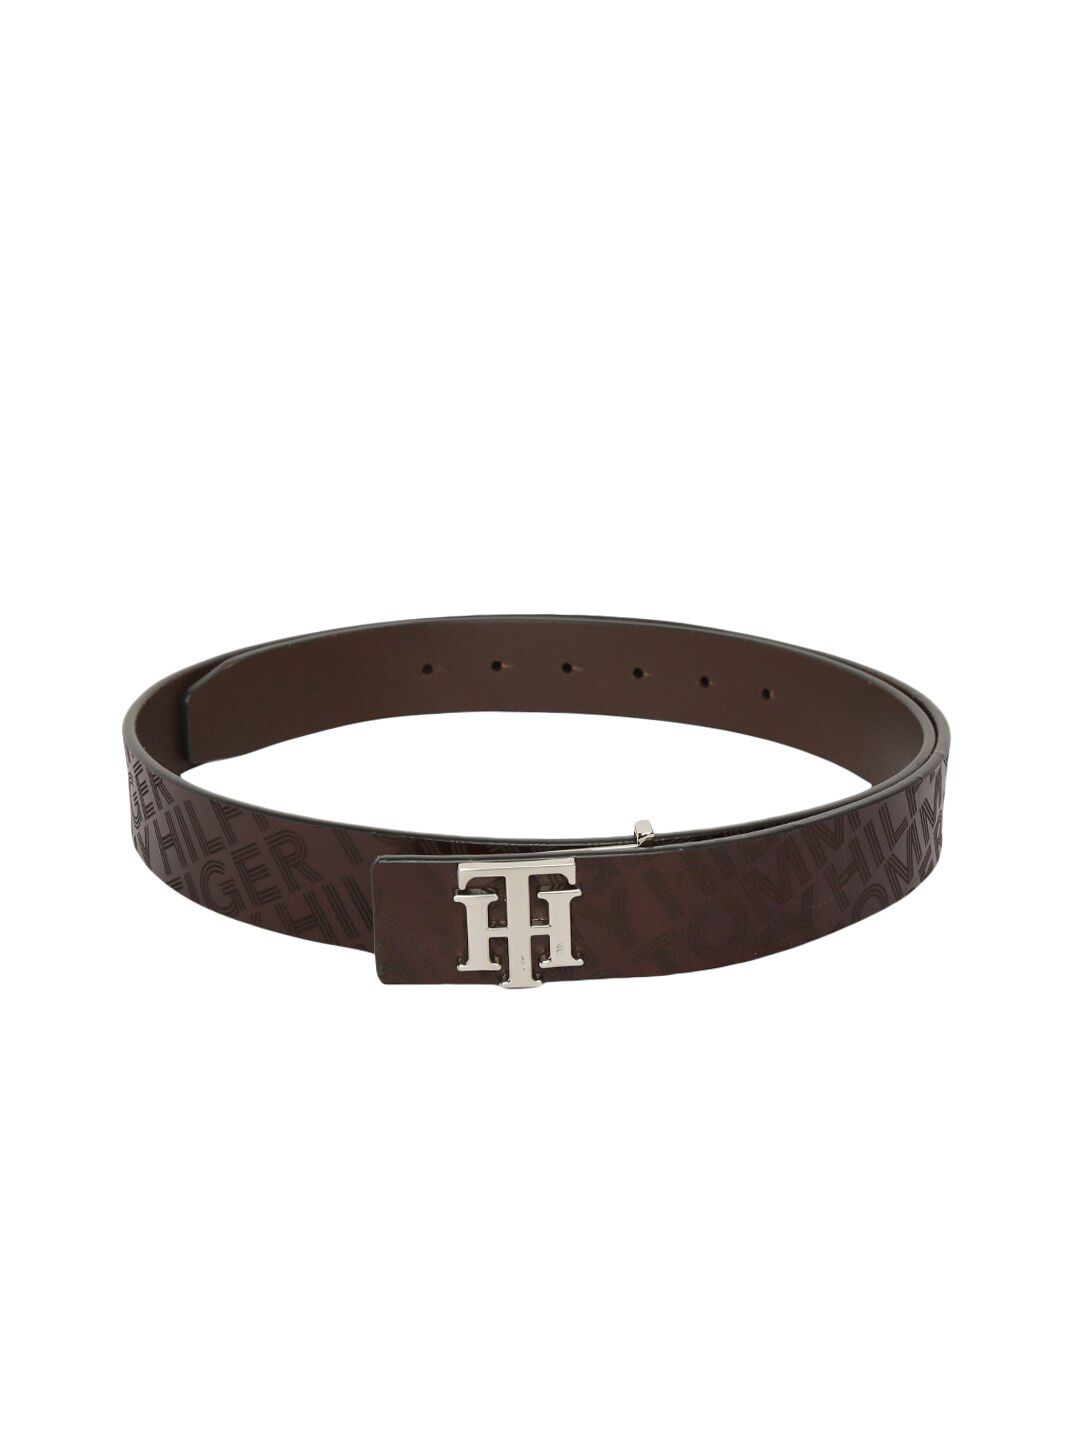 Tommy Hilfiger Unisex Brown Printed Leather Belt Price in India